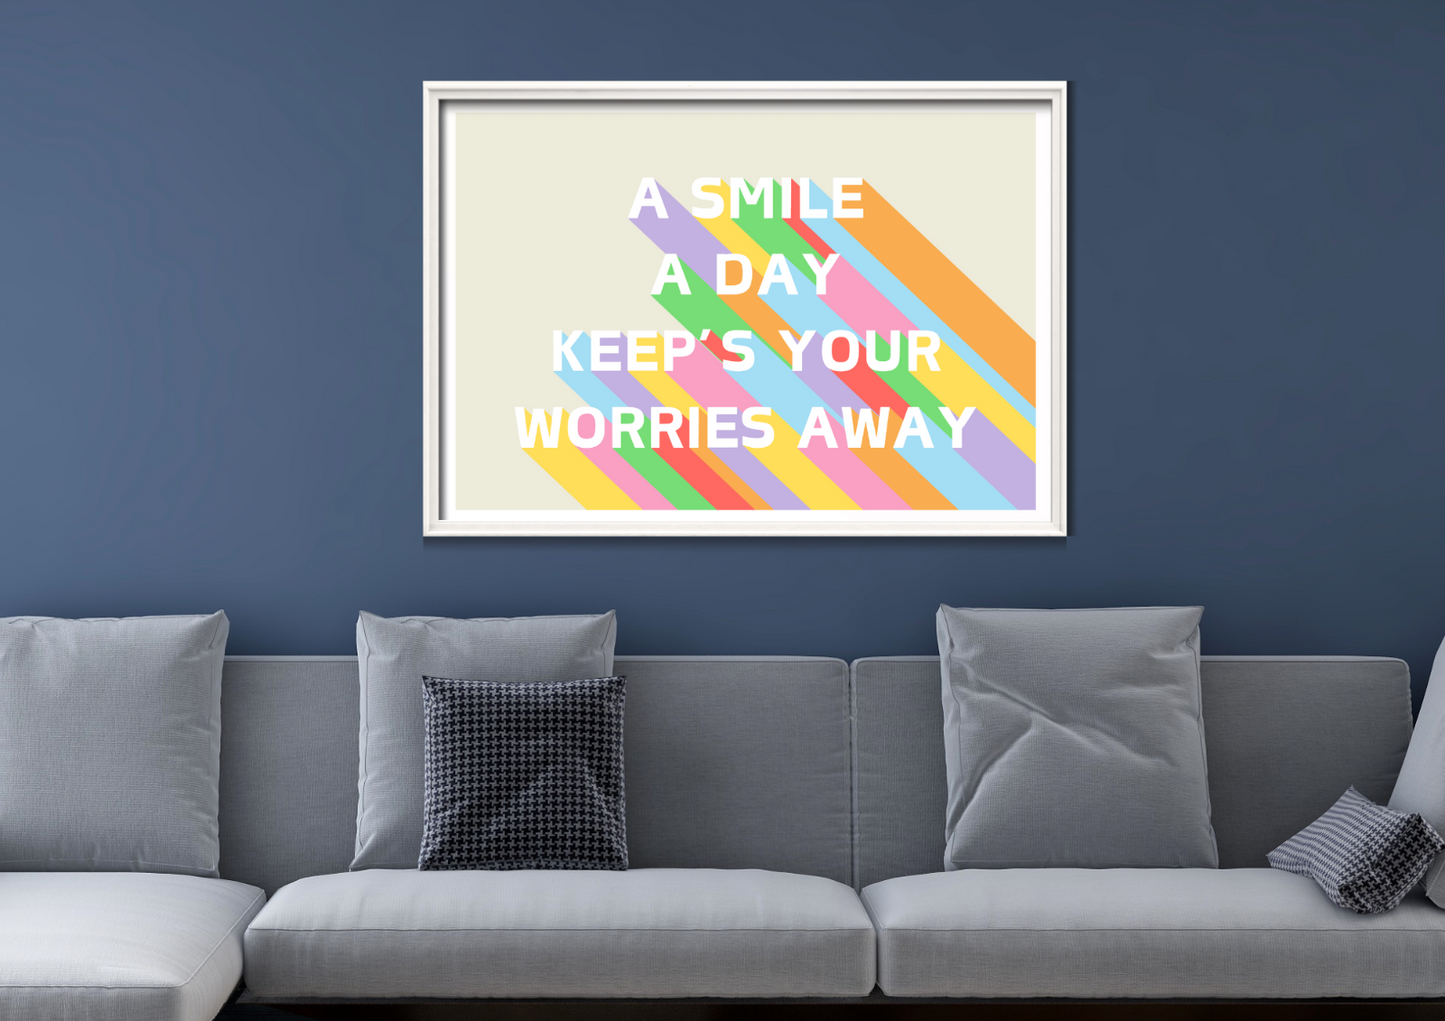 A Smile a Day Keeps Your Worries Away Art Fun Colourful Print Poster A5 A4 A3